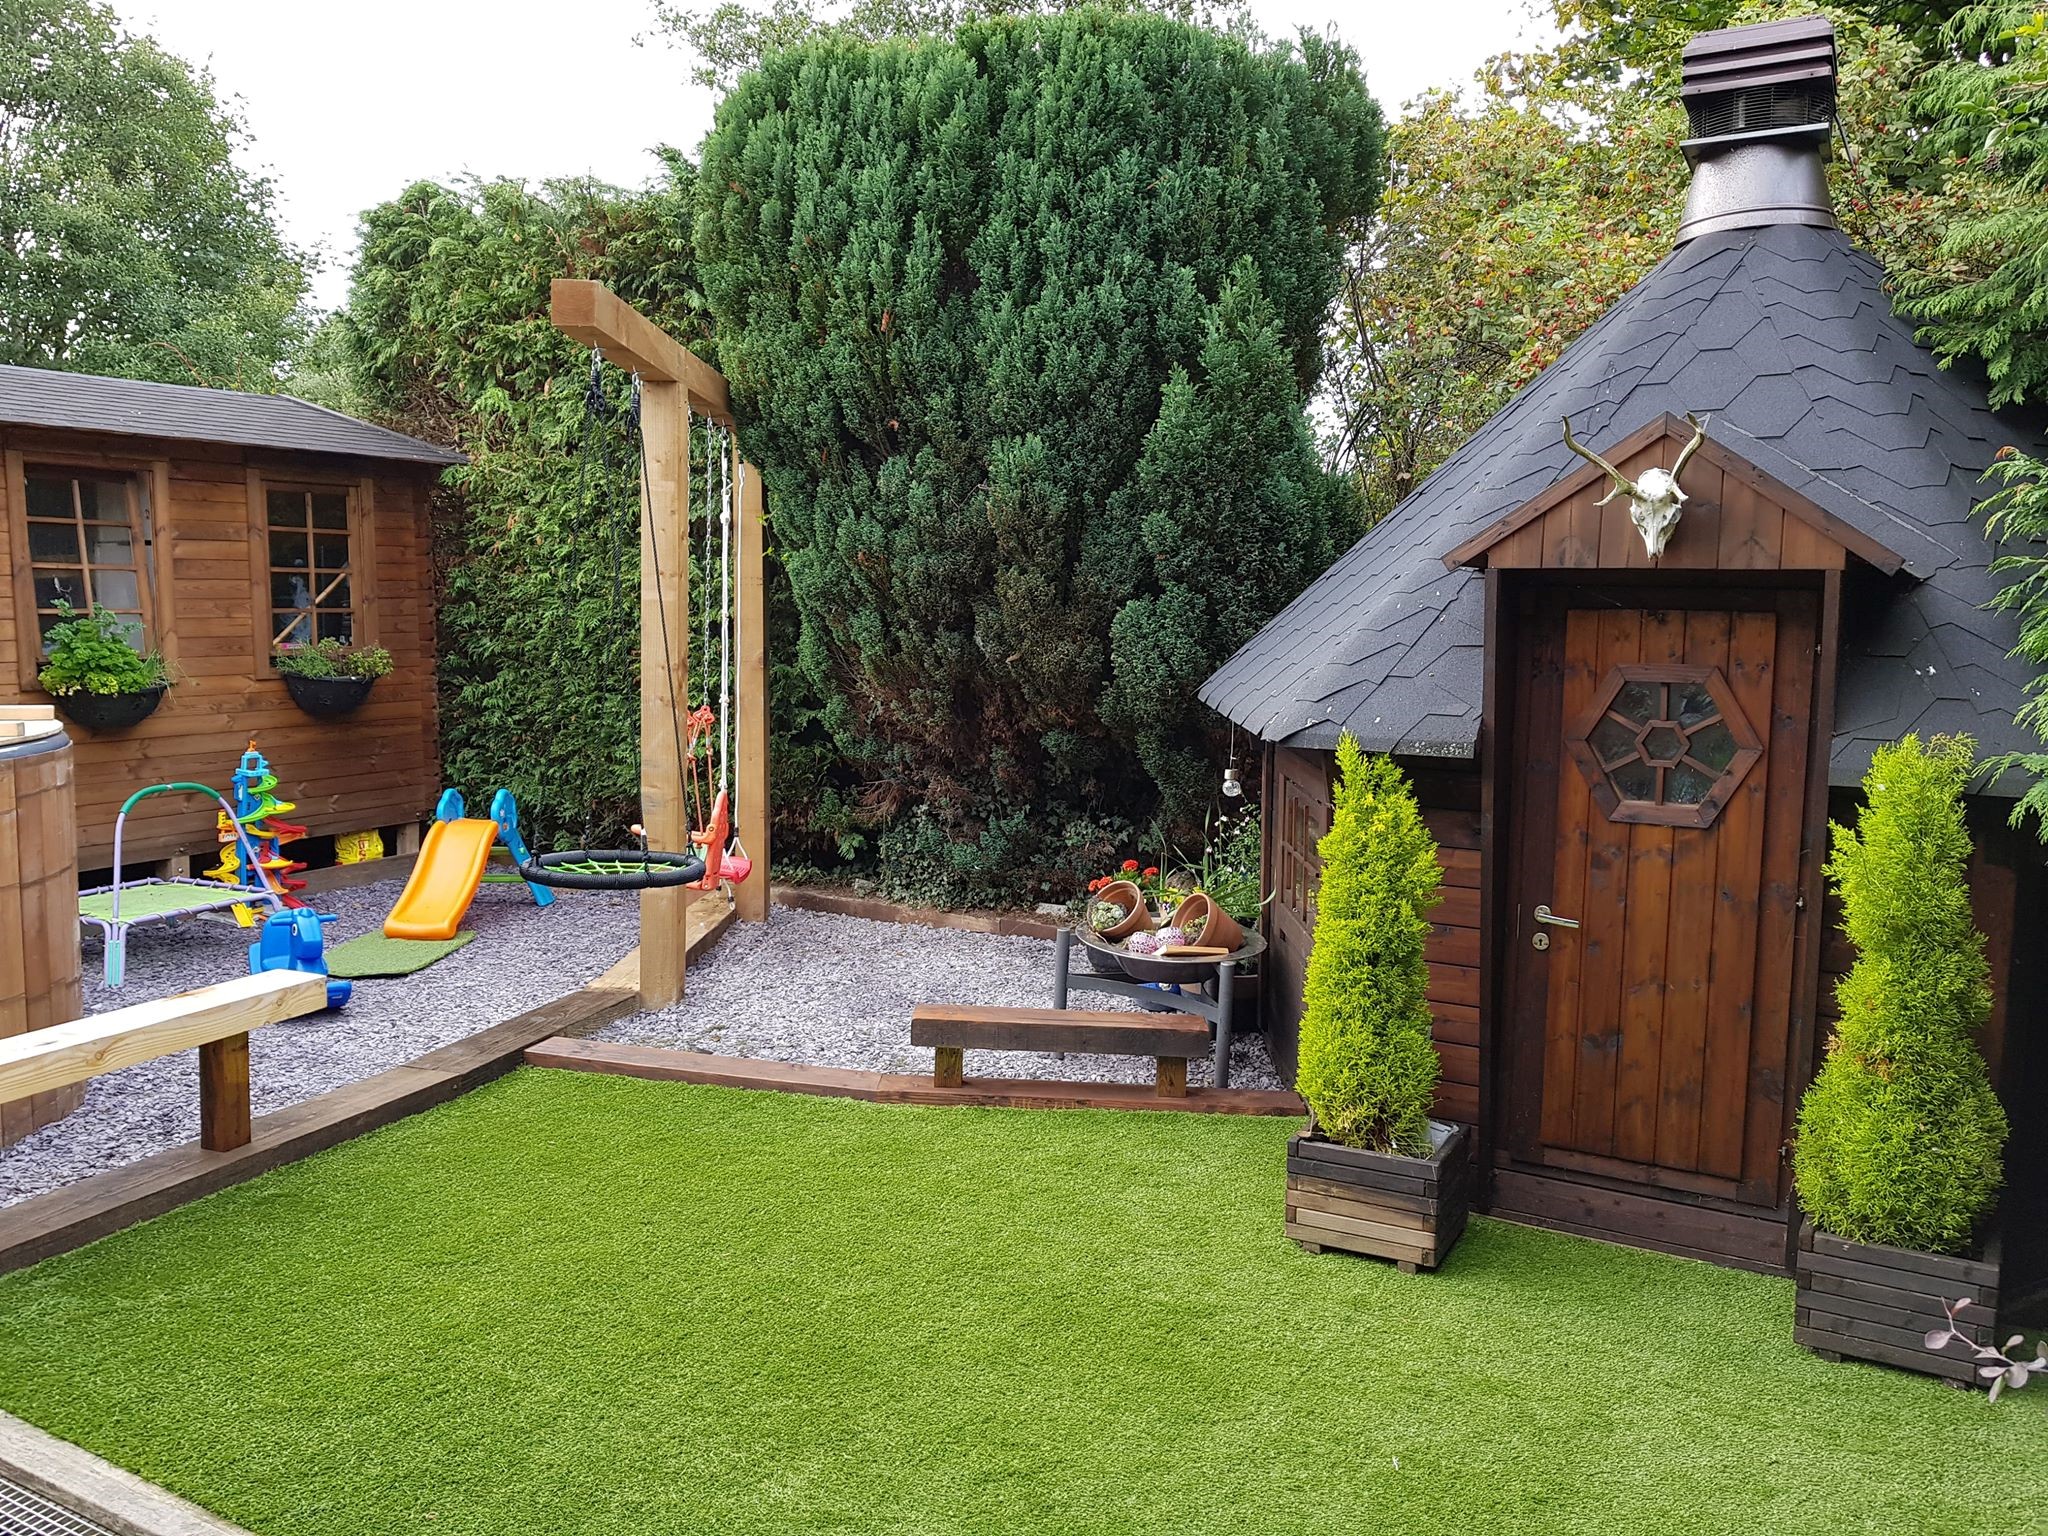 Why artificial grass is good